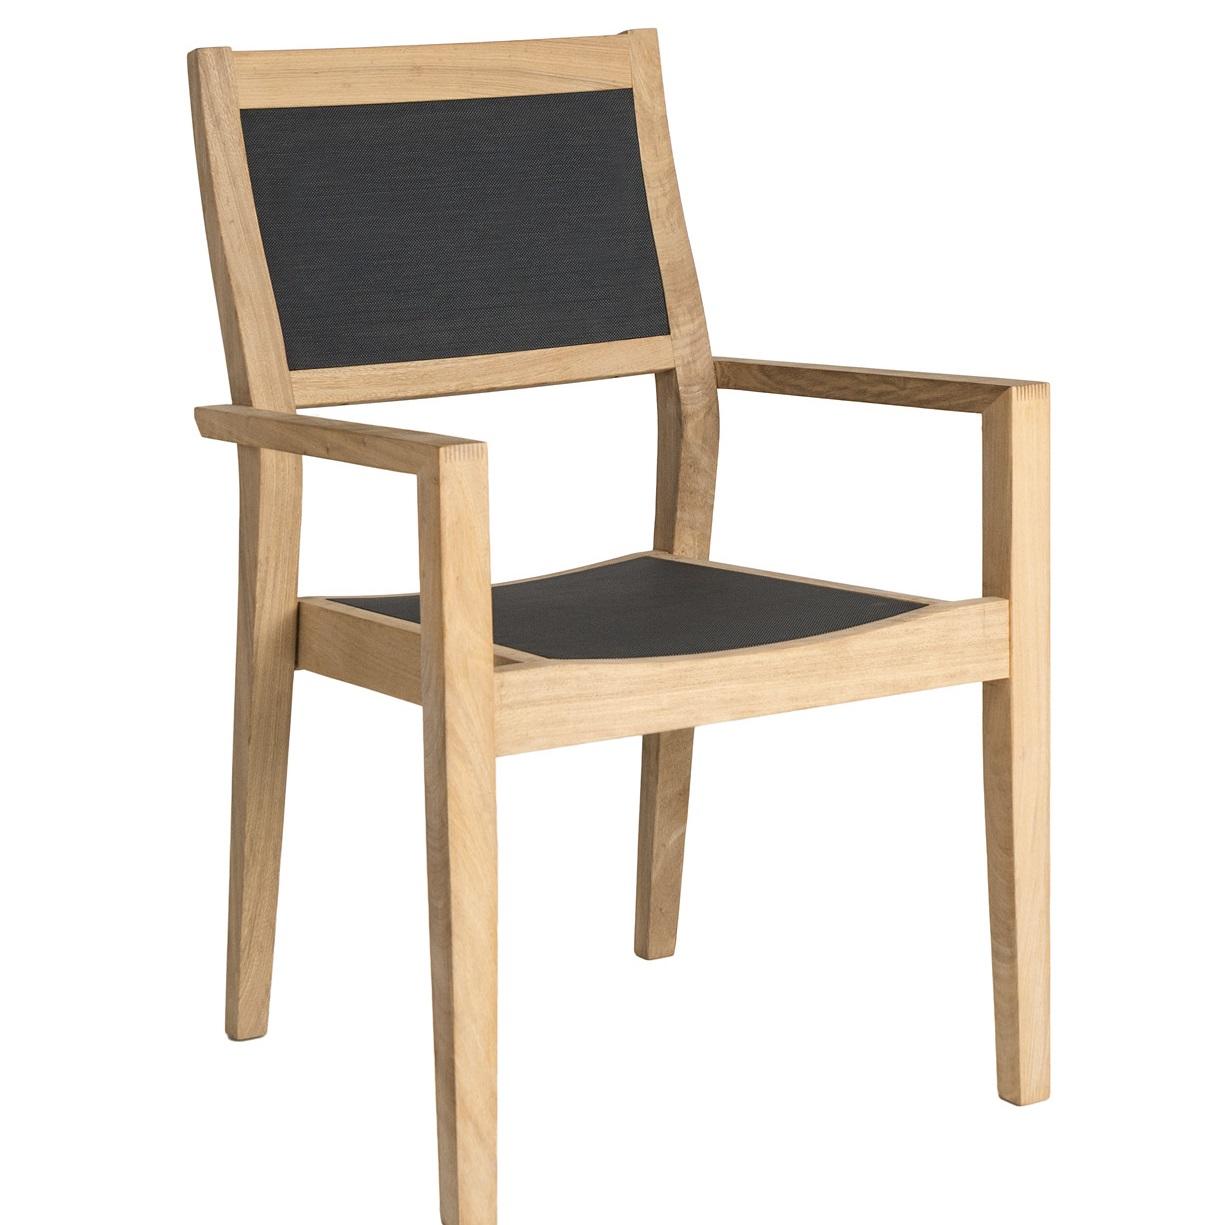 wood rose sling garden dining chairs stacking roble hardwood